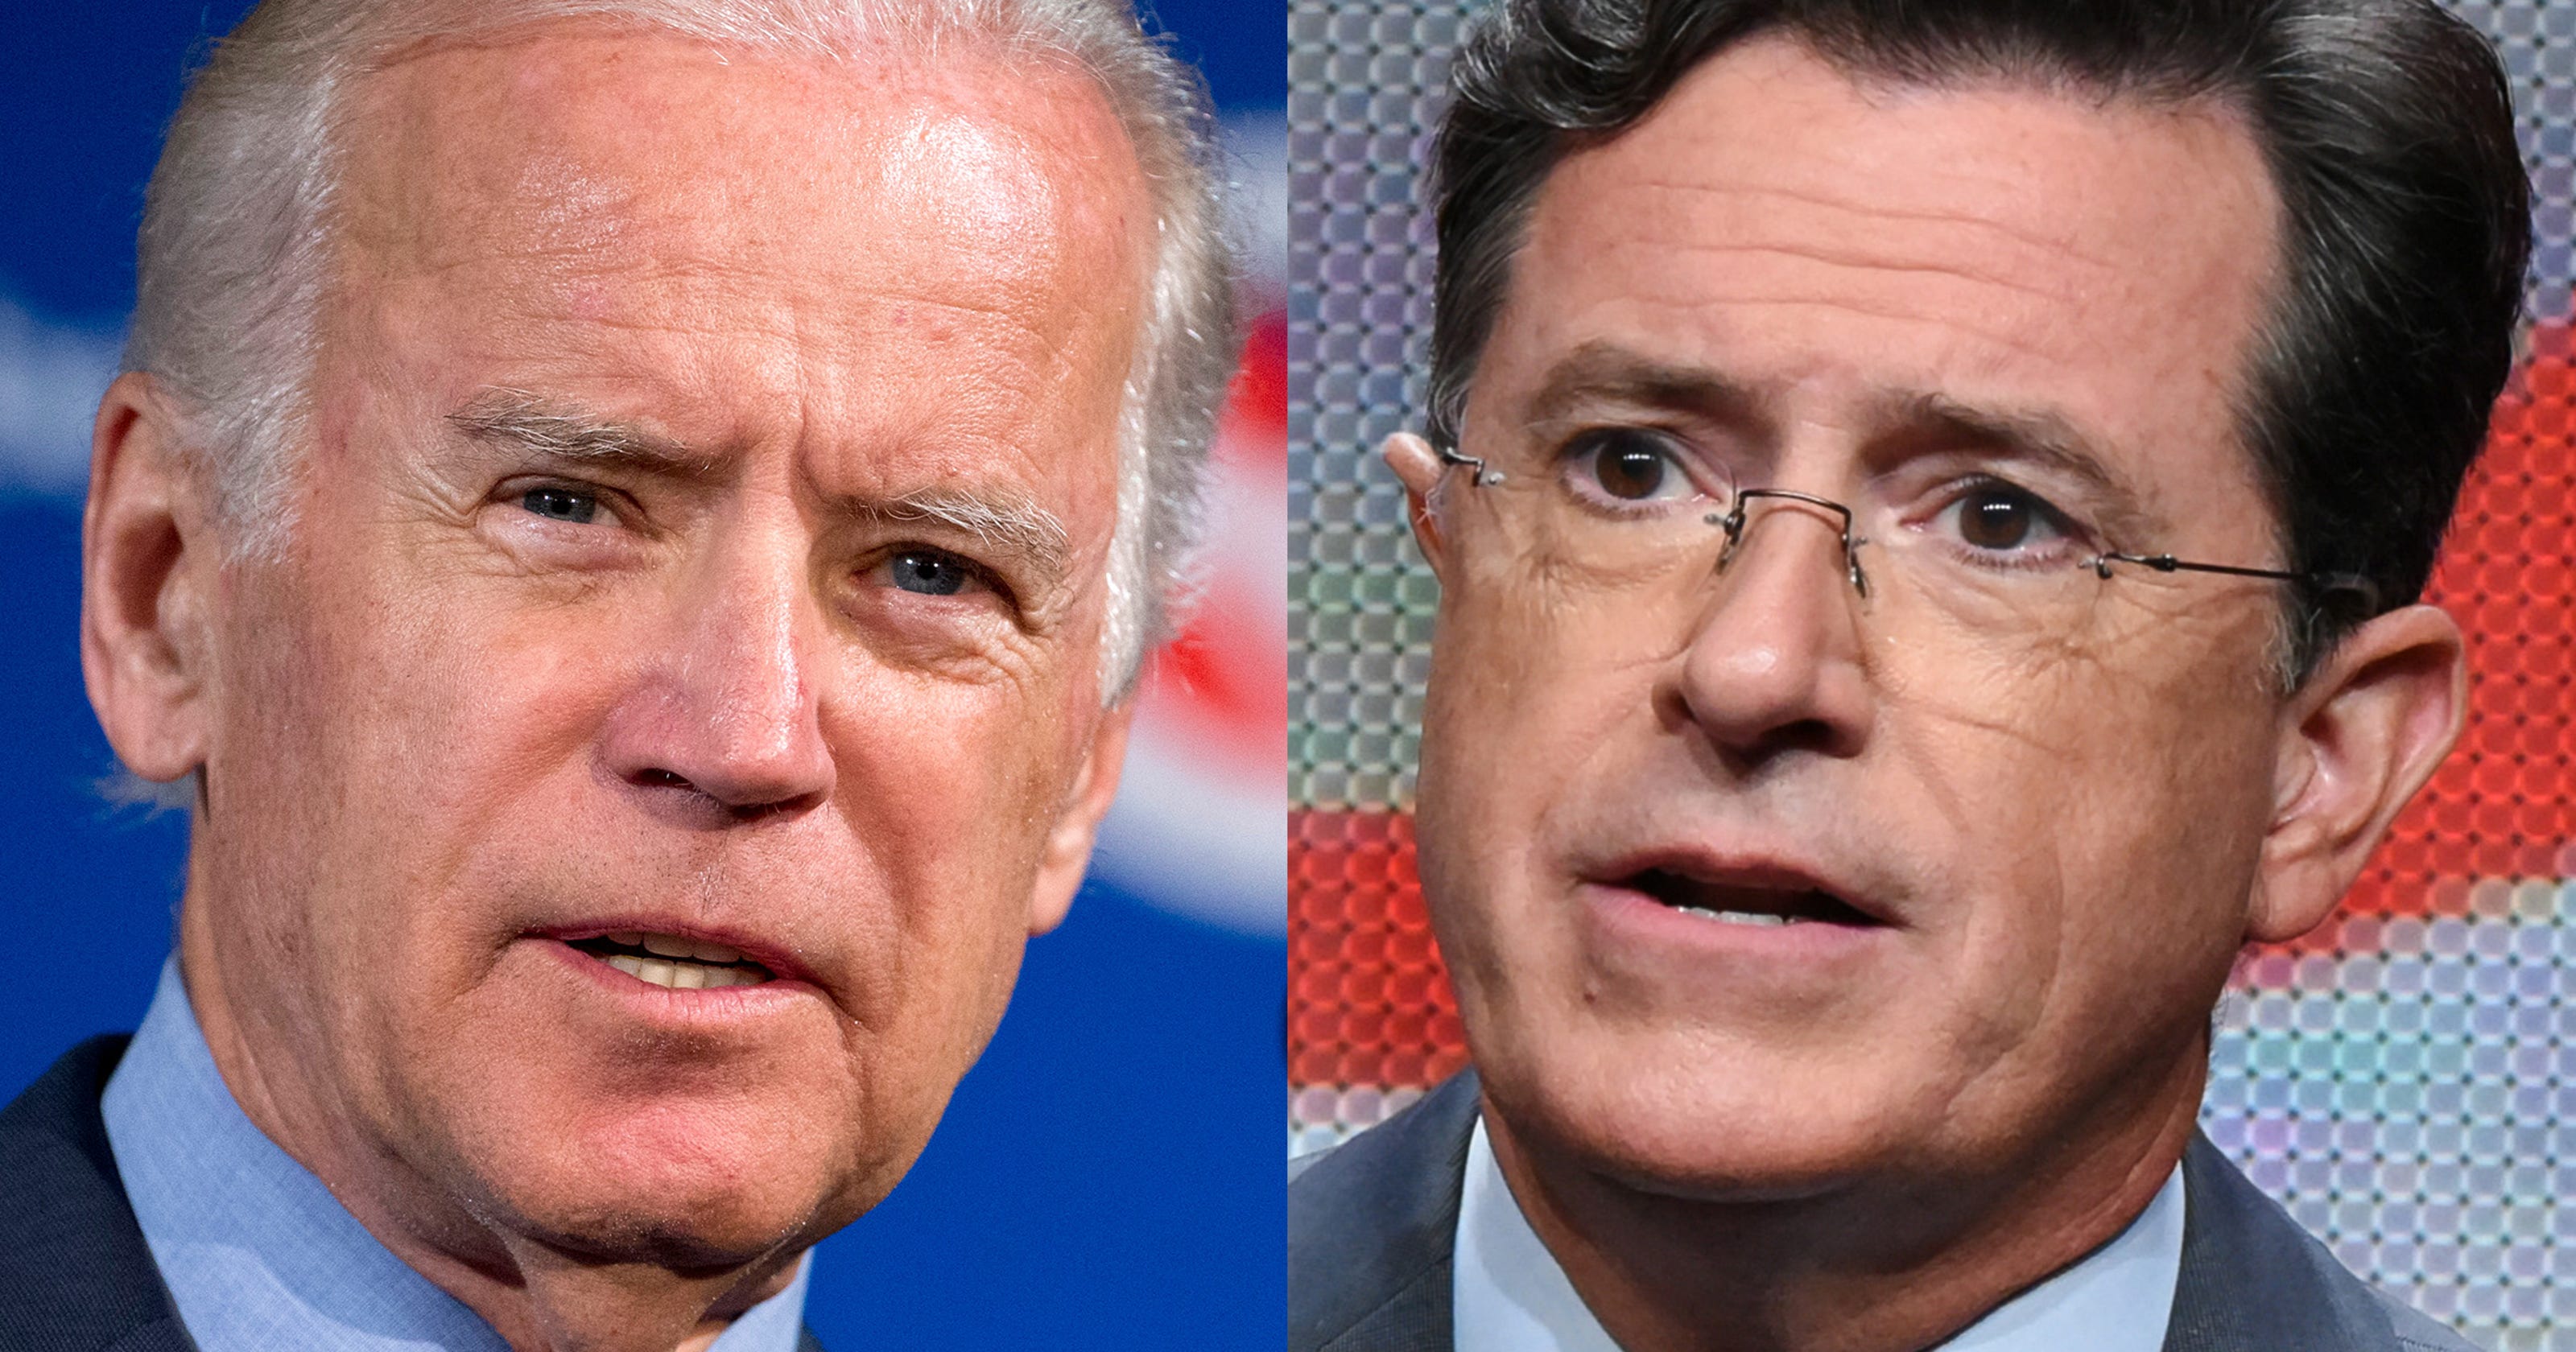 colbert-spoofs-biden-s-story-with-corn-pop-this-malarky-ends-here